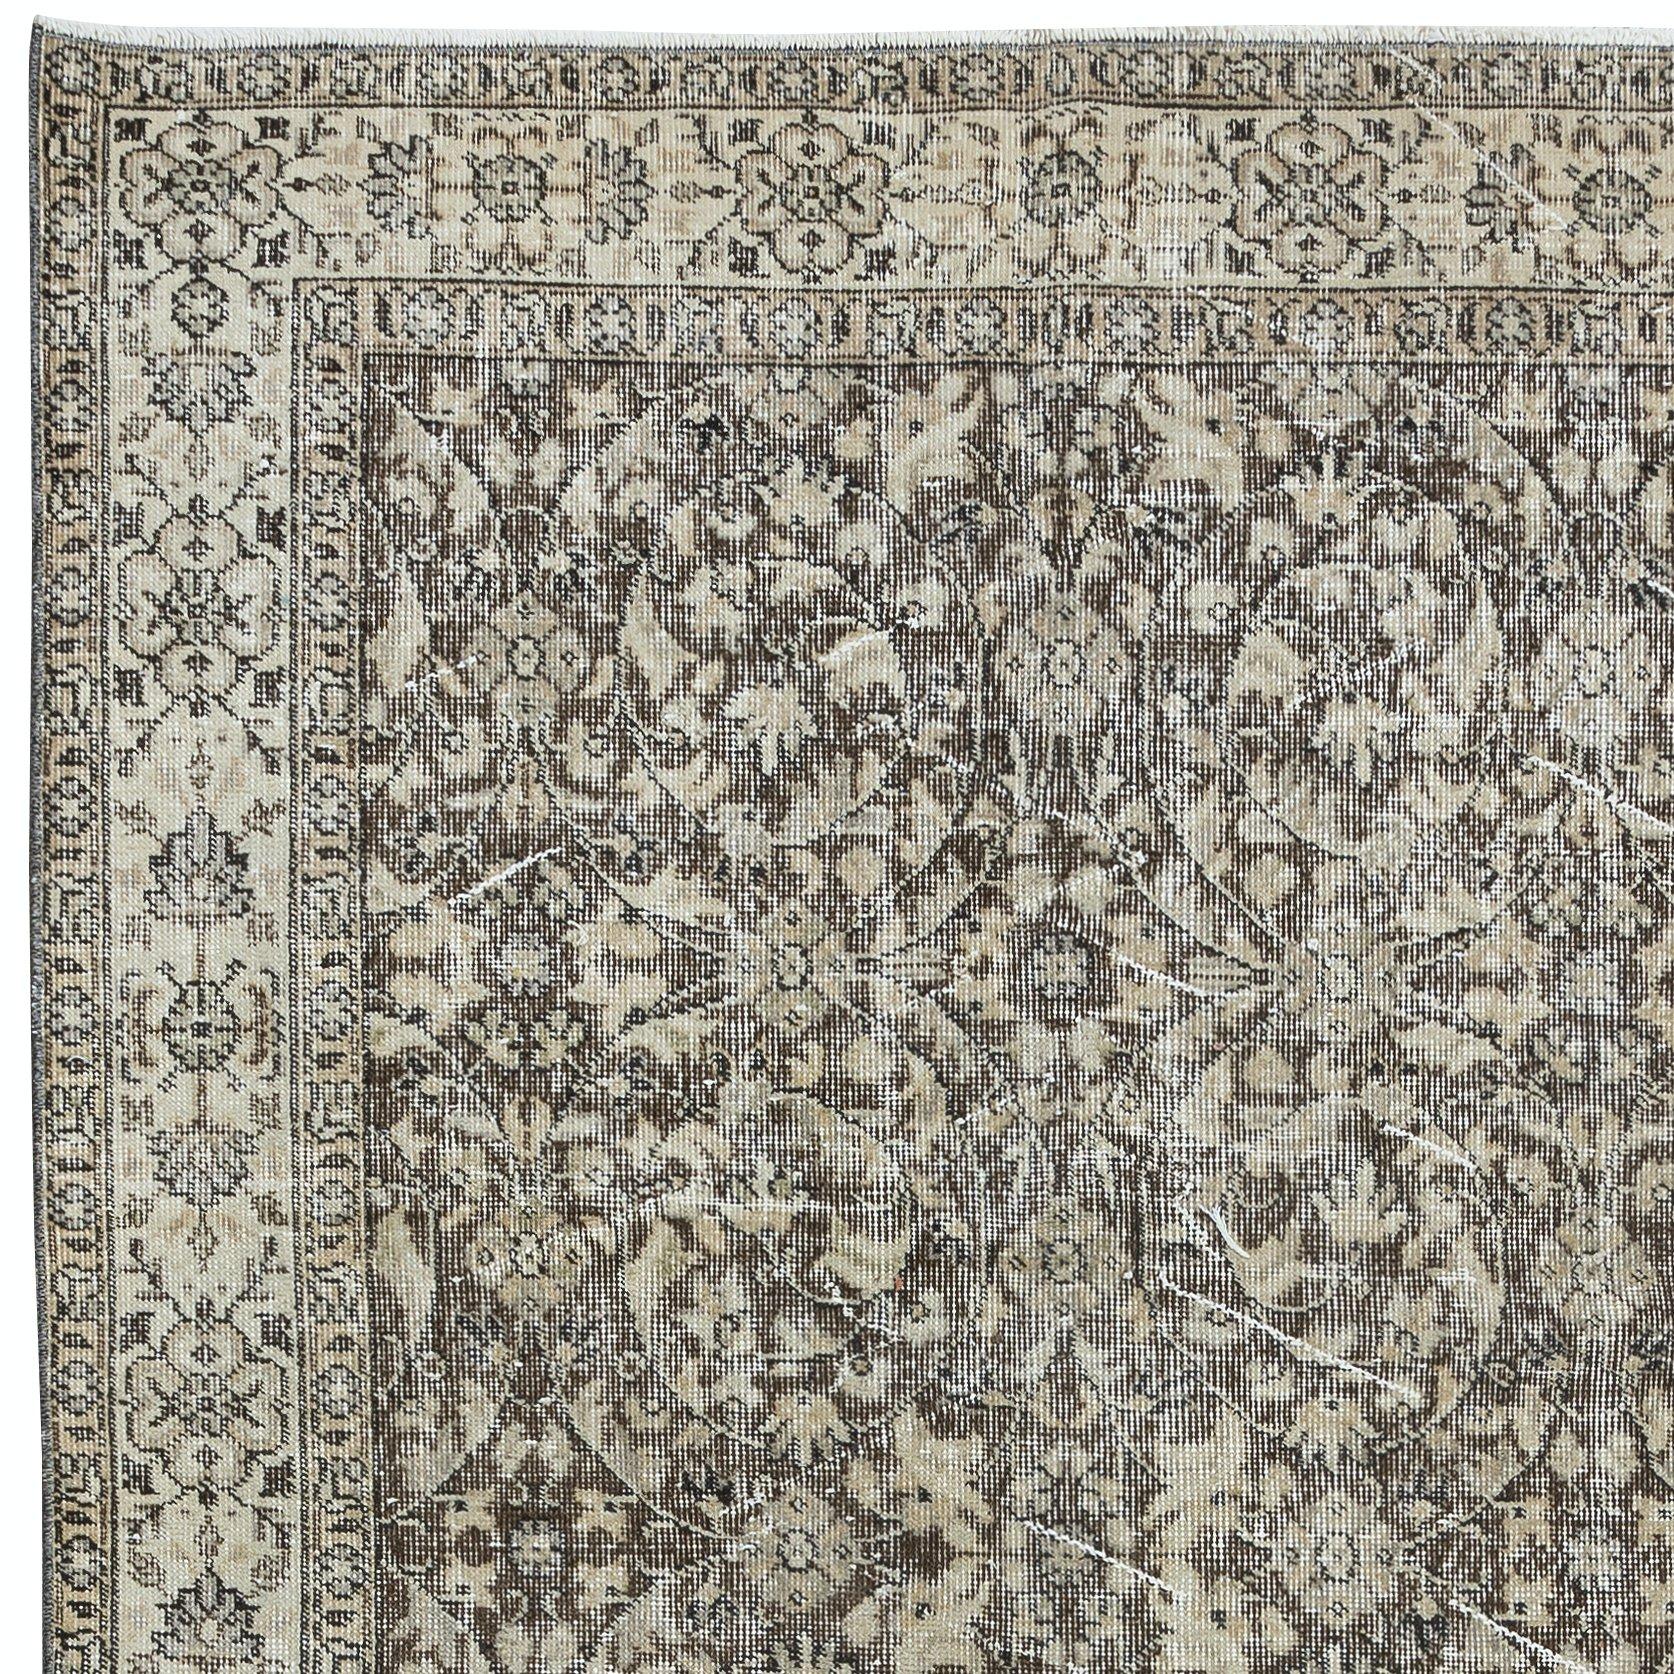 Hand-Knotted 4.6x8.3 Ft Vintage Floral Rug, Hand Knotted Turkish Wool Carpet in Beige & Brown For Sale